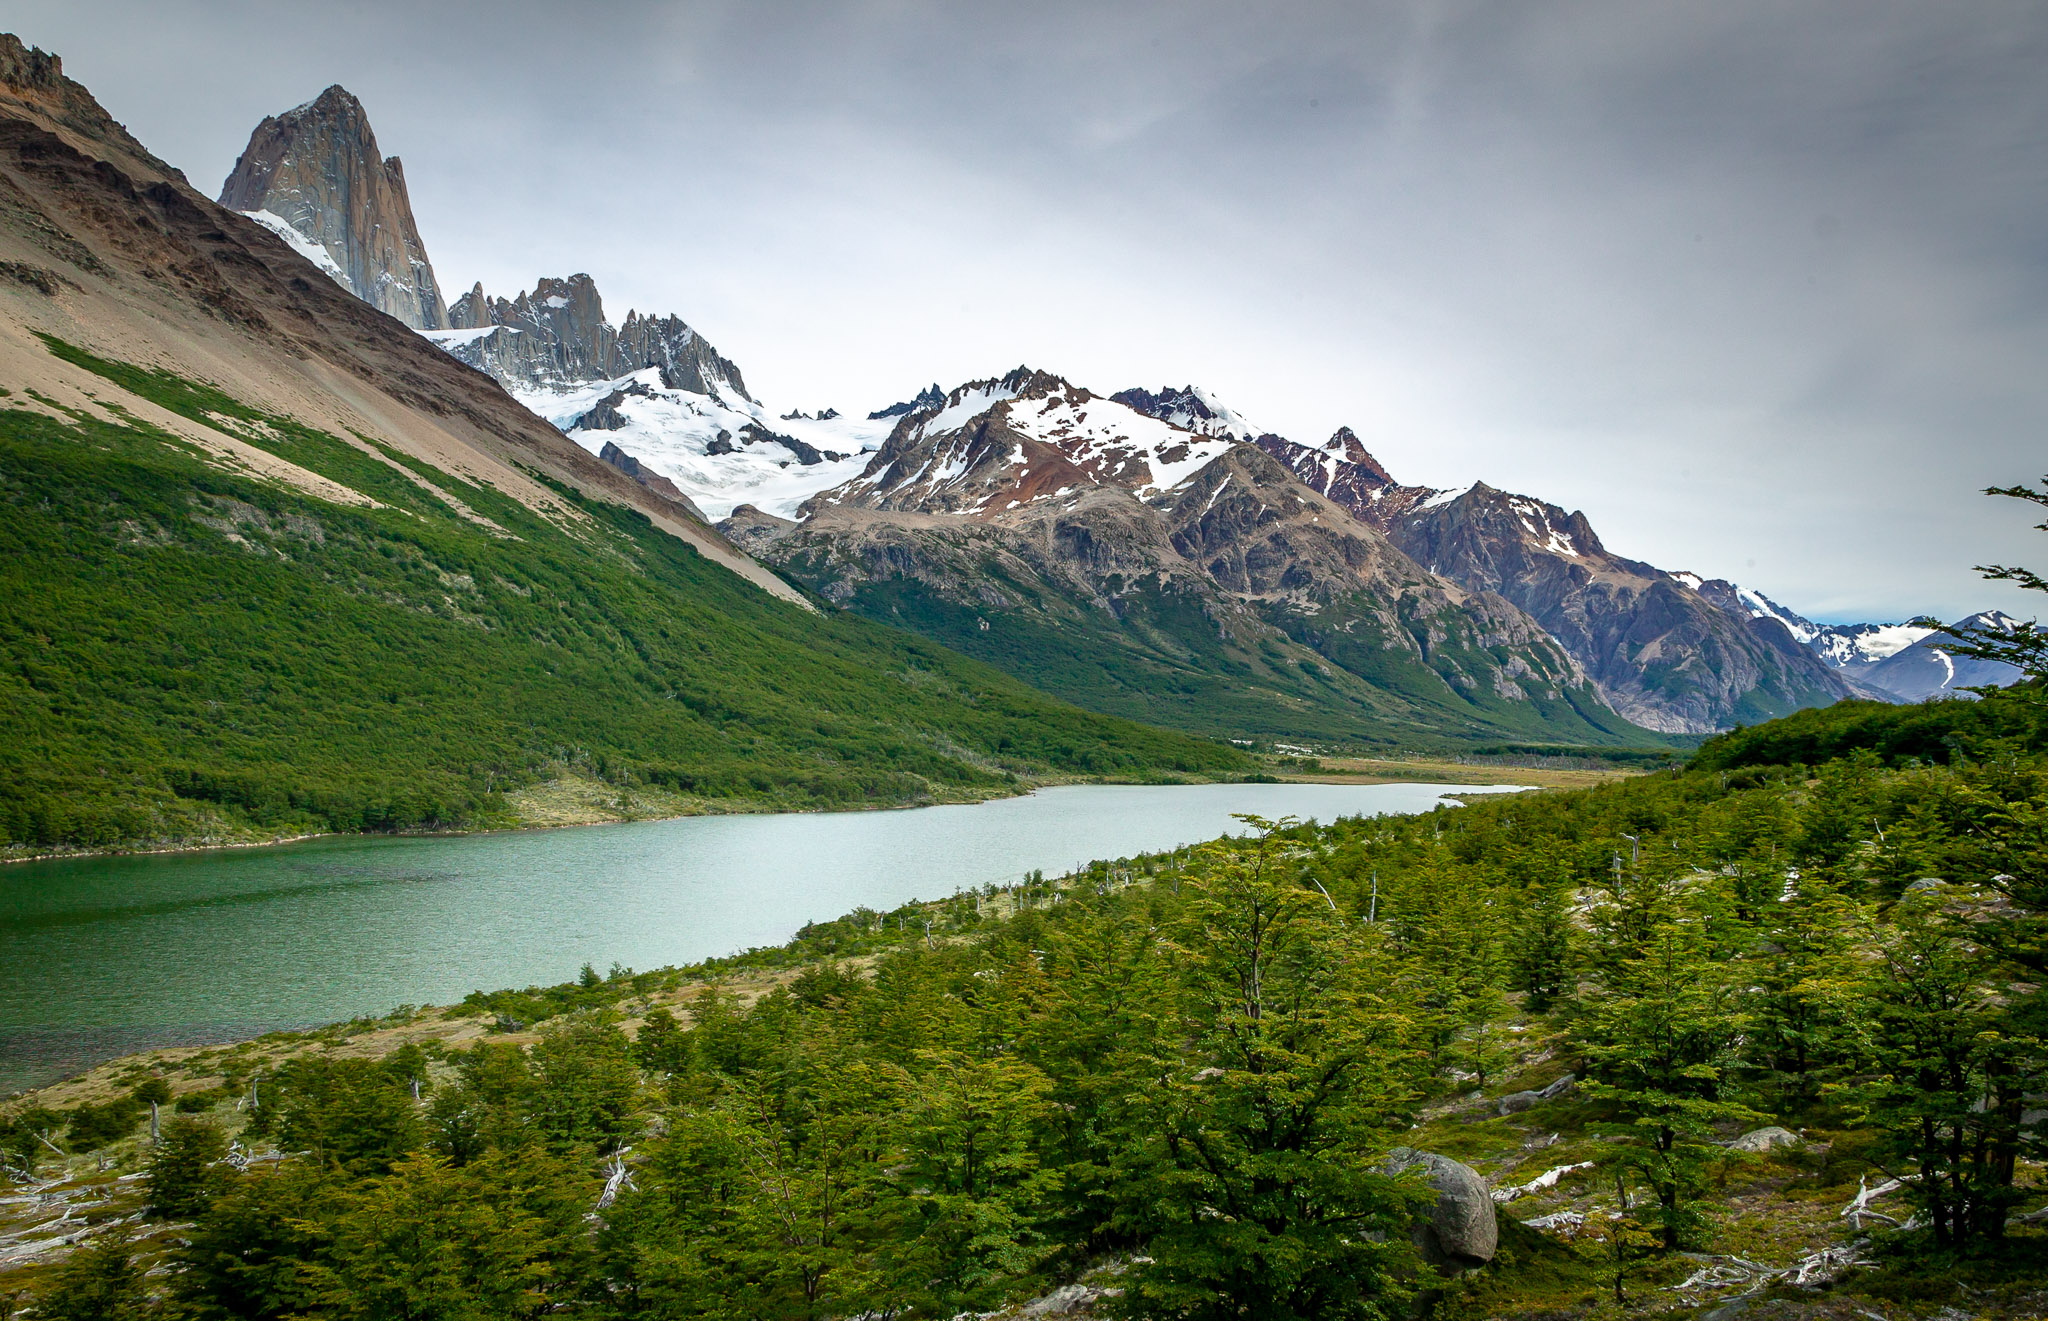 Lago Madre, with Fitz Roy peeking out